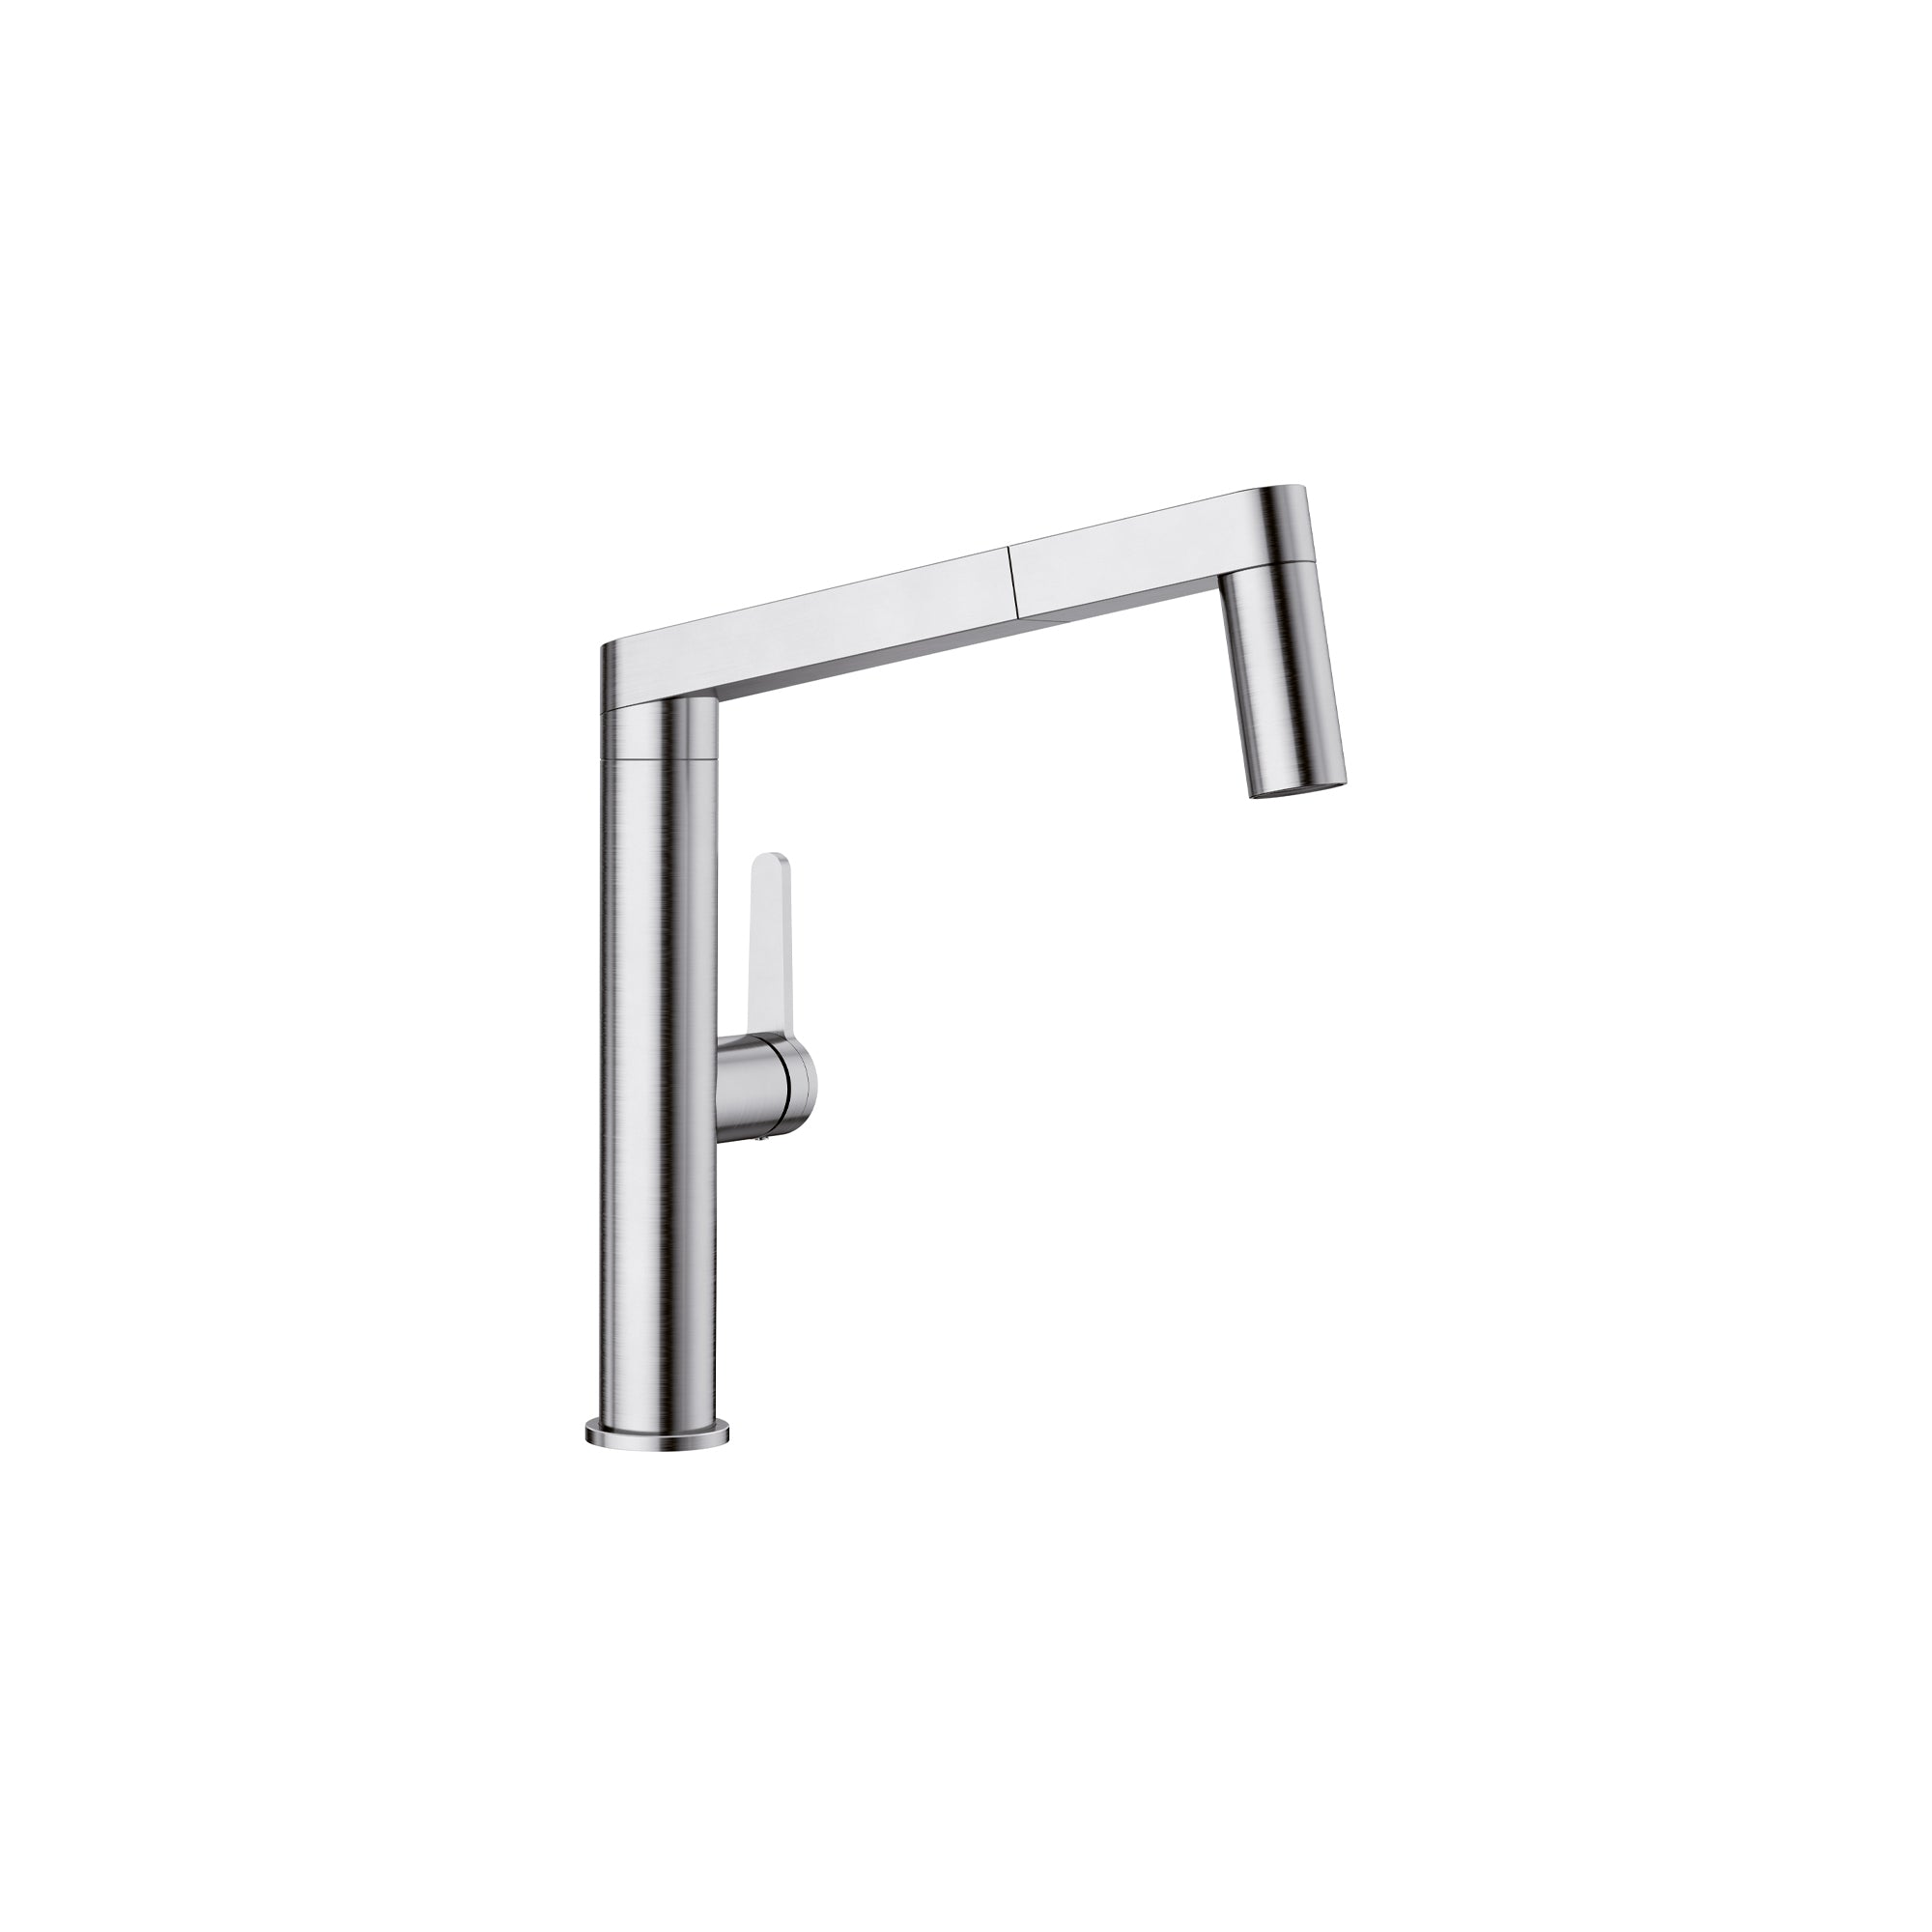 Blanco 402043- PANERA Low Arc Pull-Out Dual Spray Faucet, Stainless Steel - FaucetExpress.ca